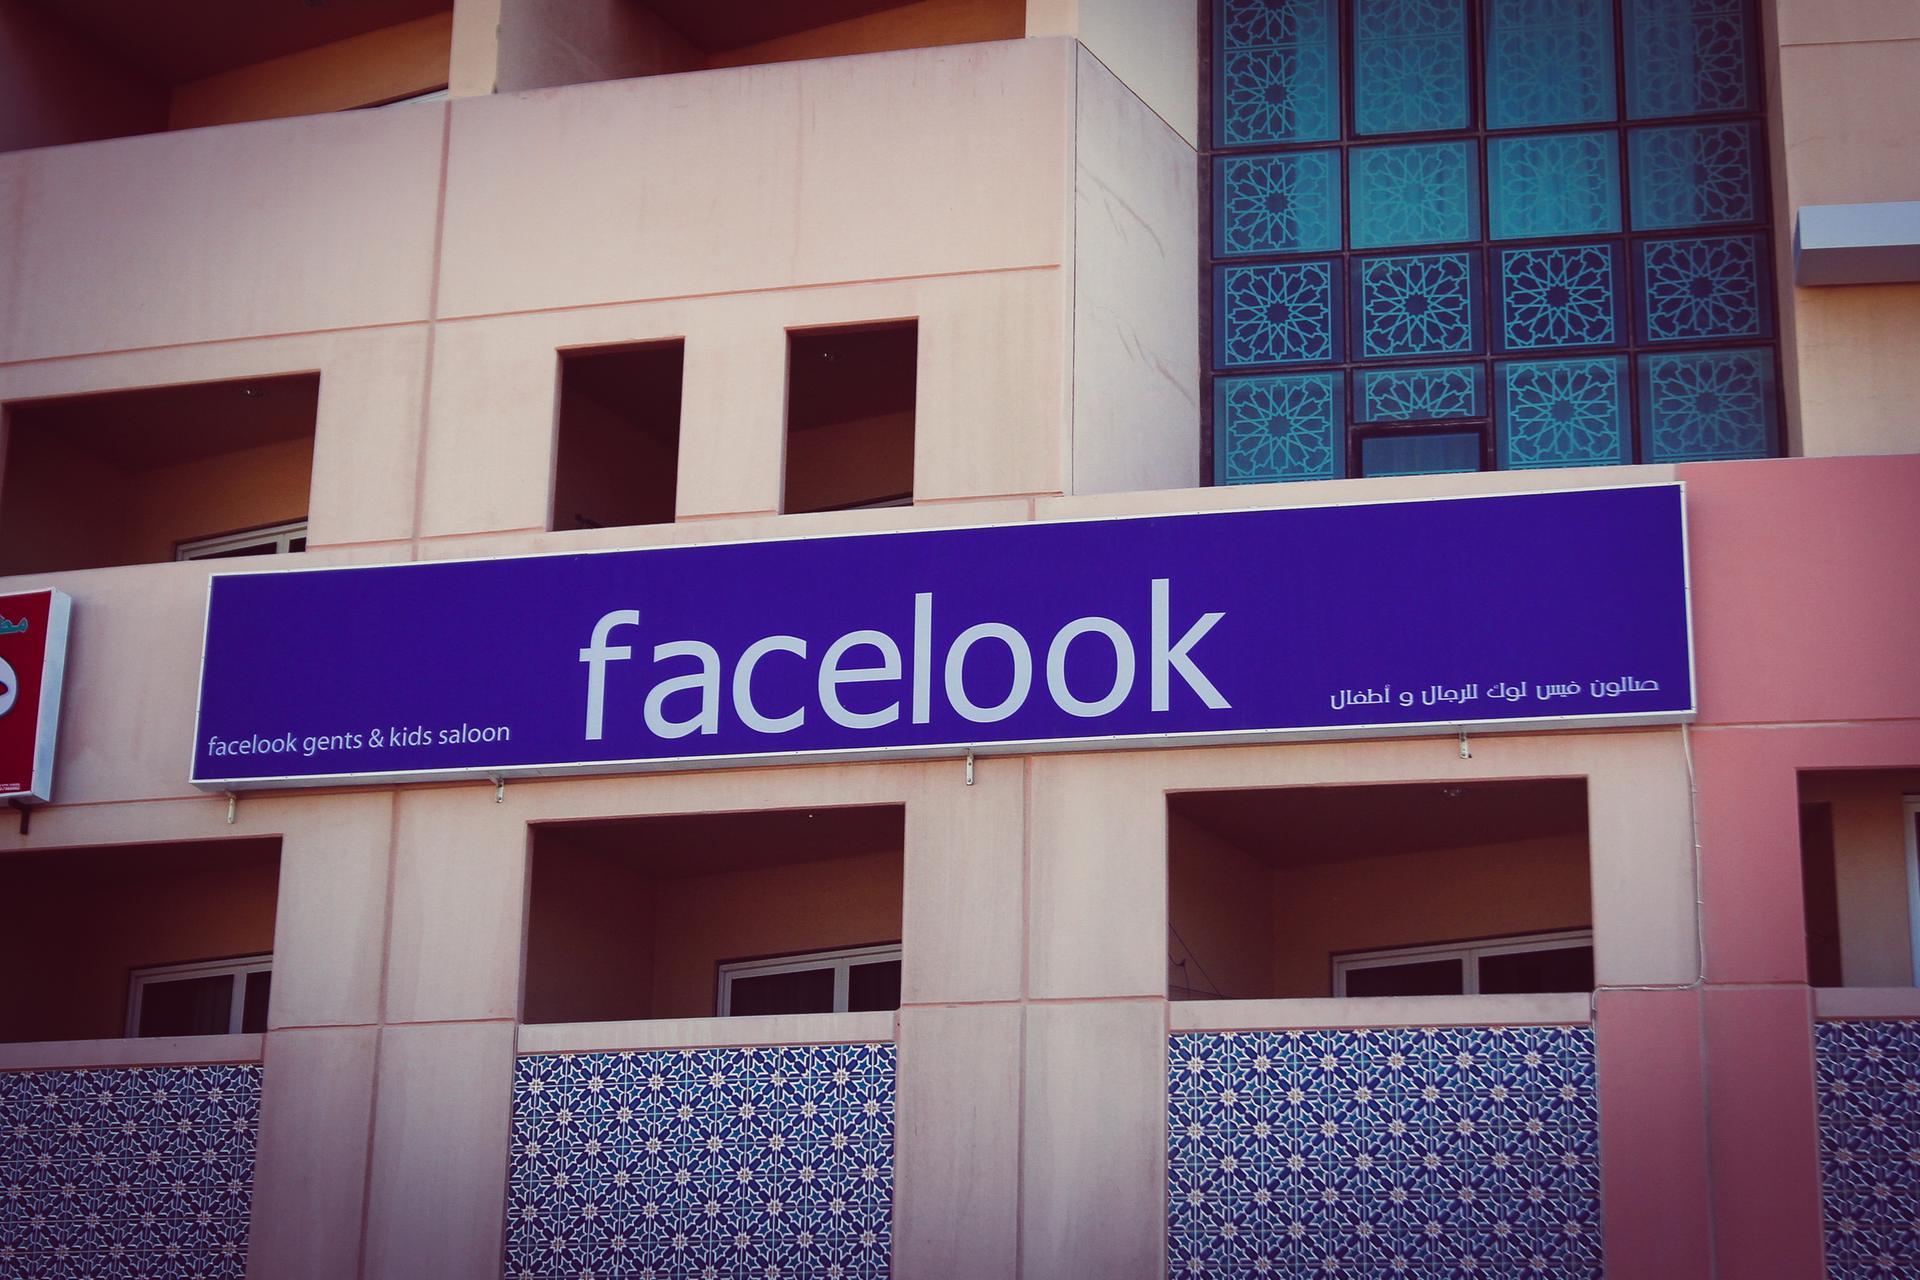 Some of Dubai's best shop names - in pictures